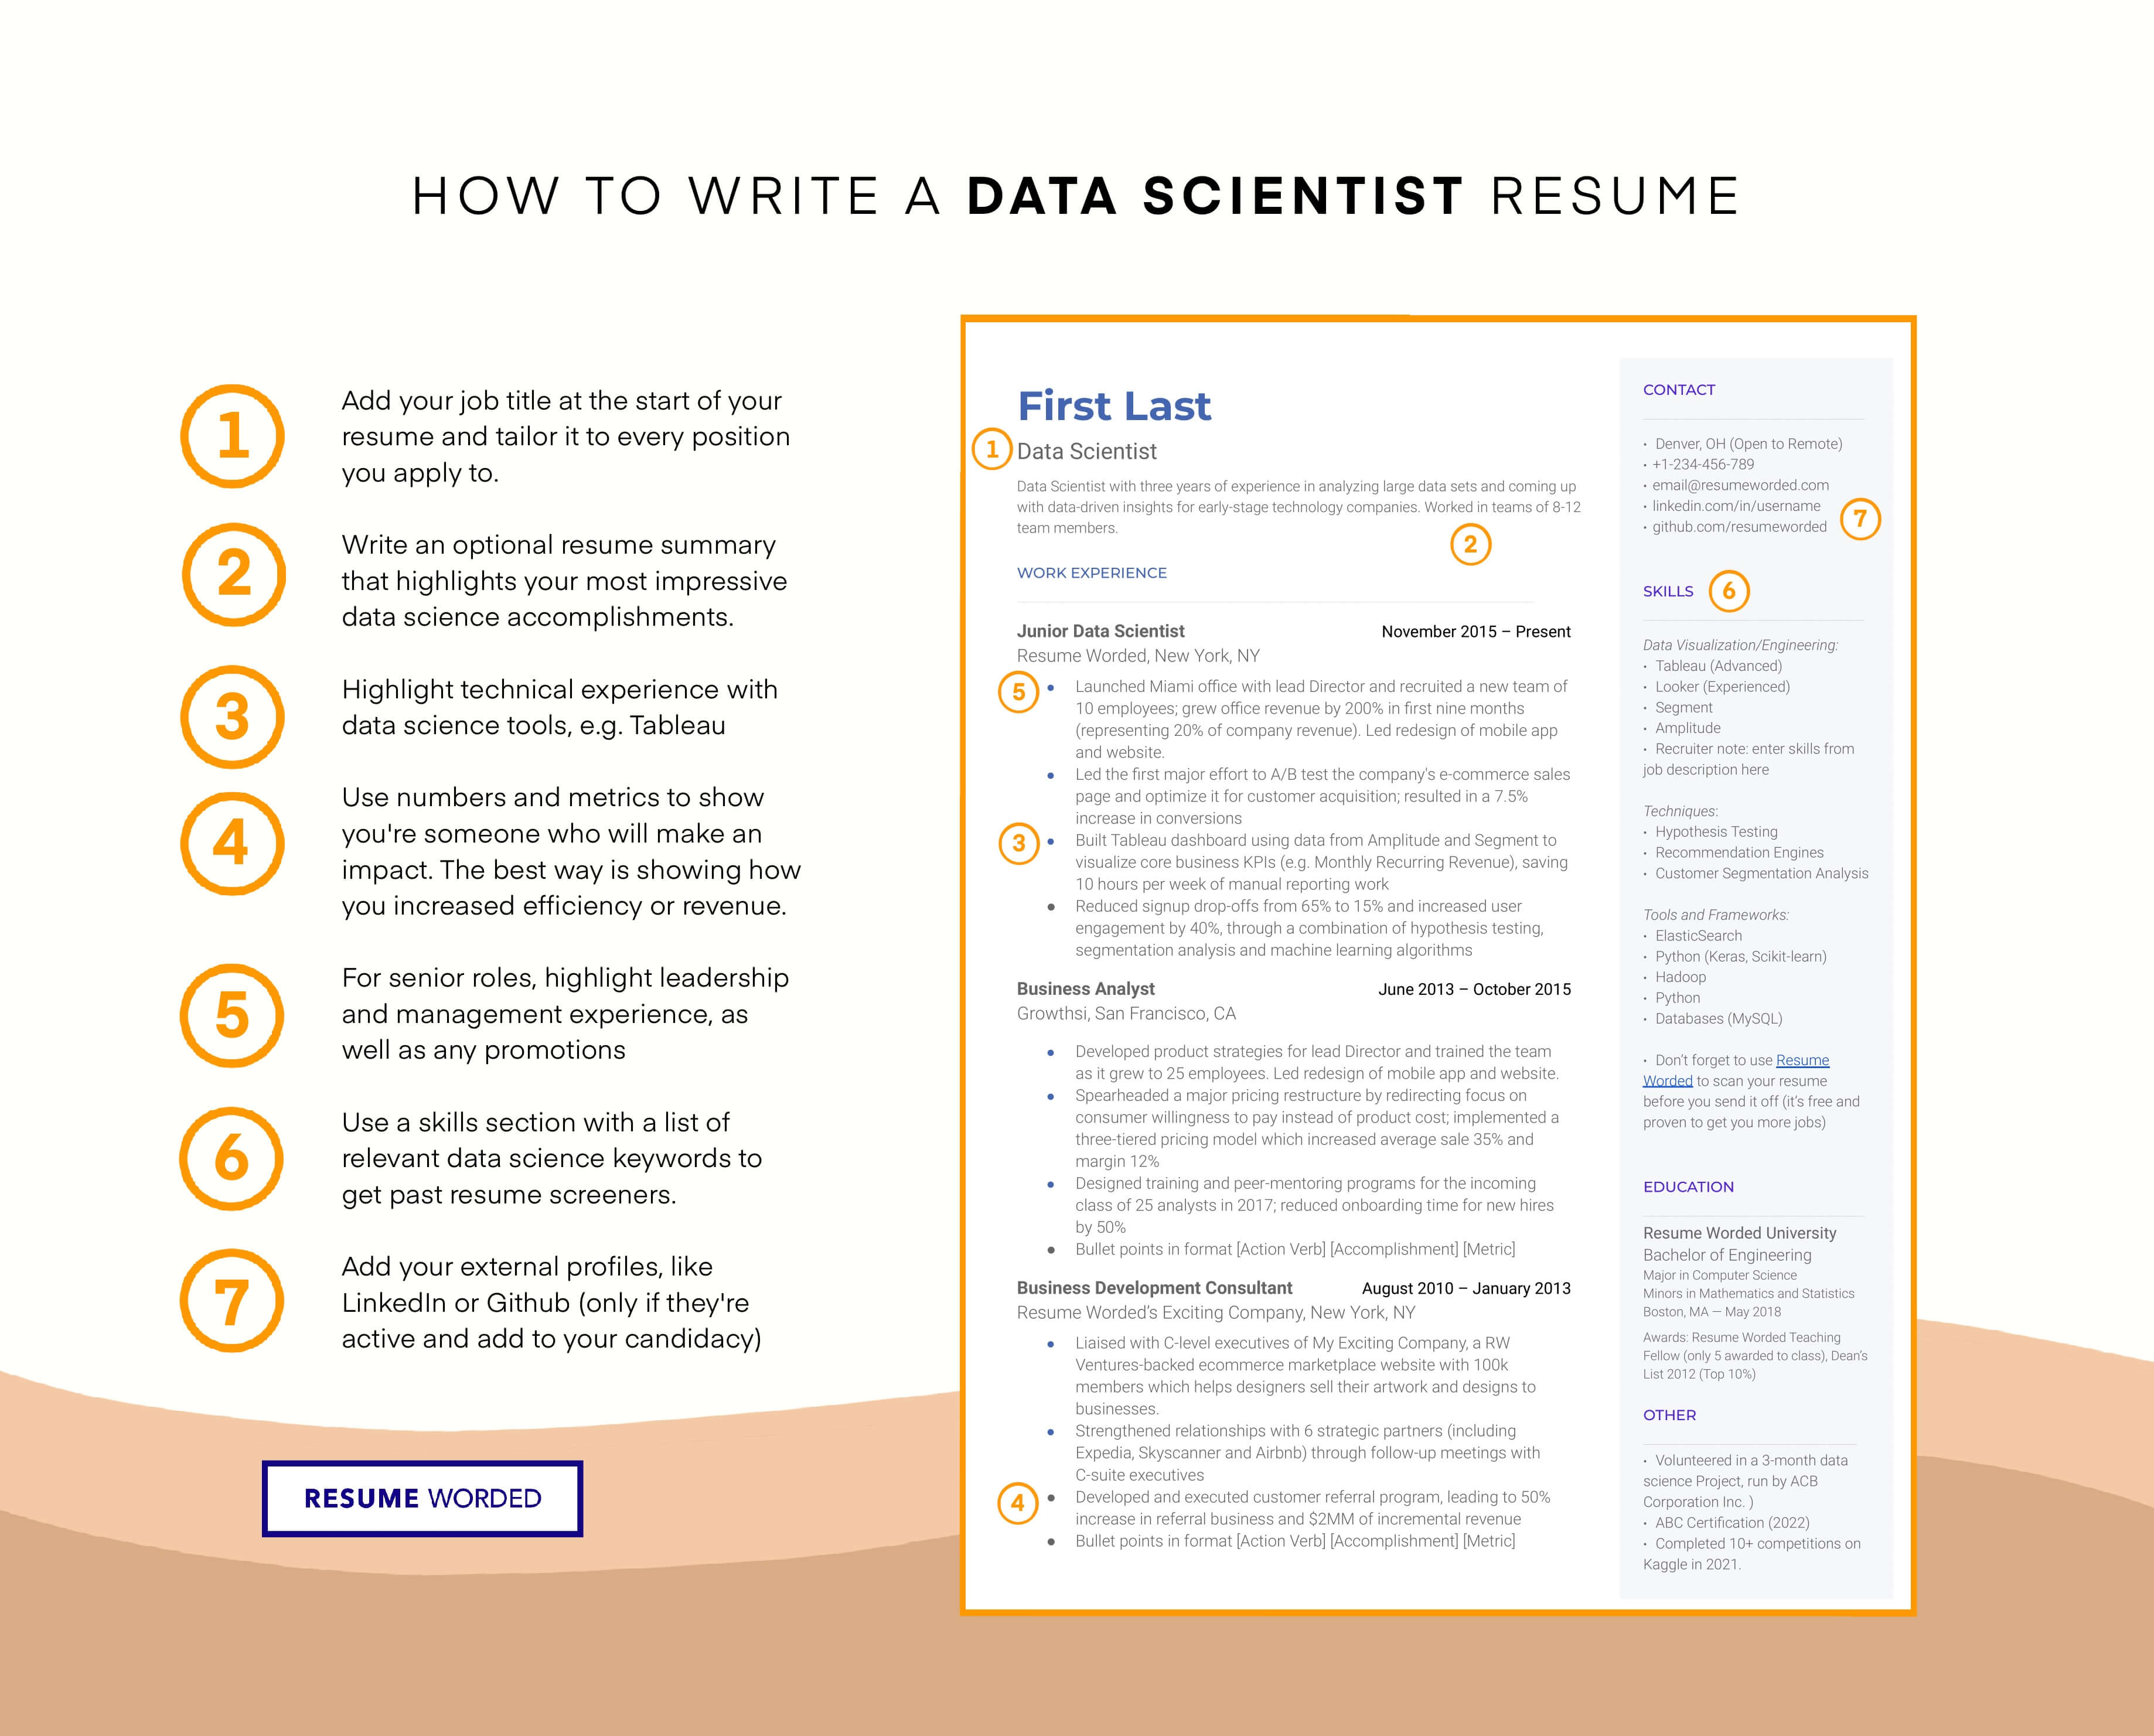 Numbers and metrics relevant to data scientists - Data Scientist Resume